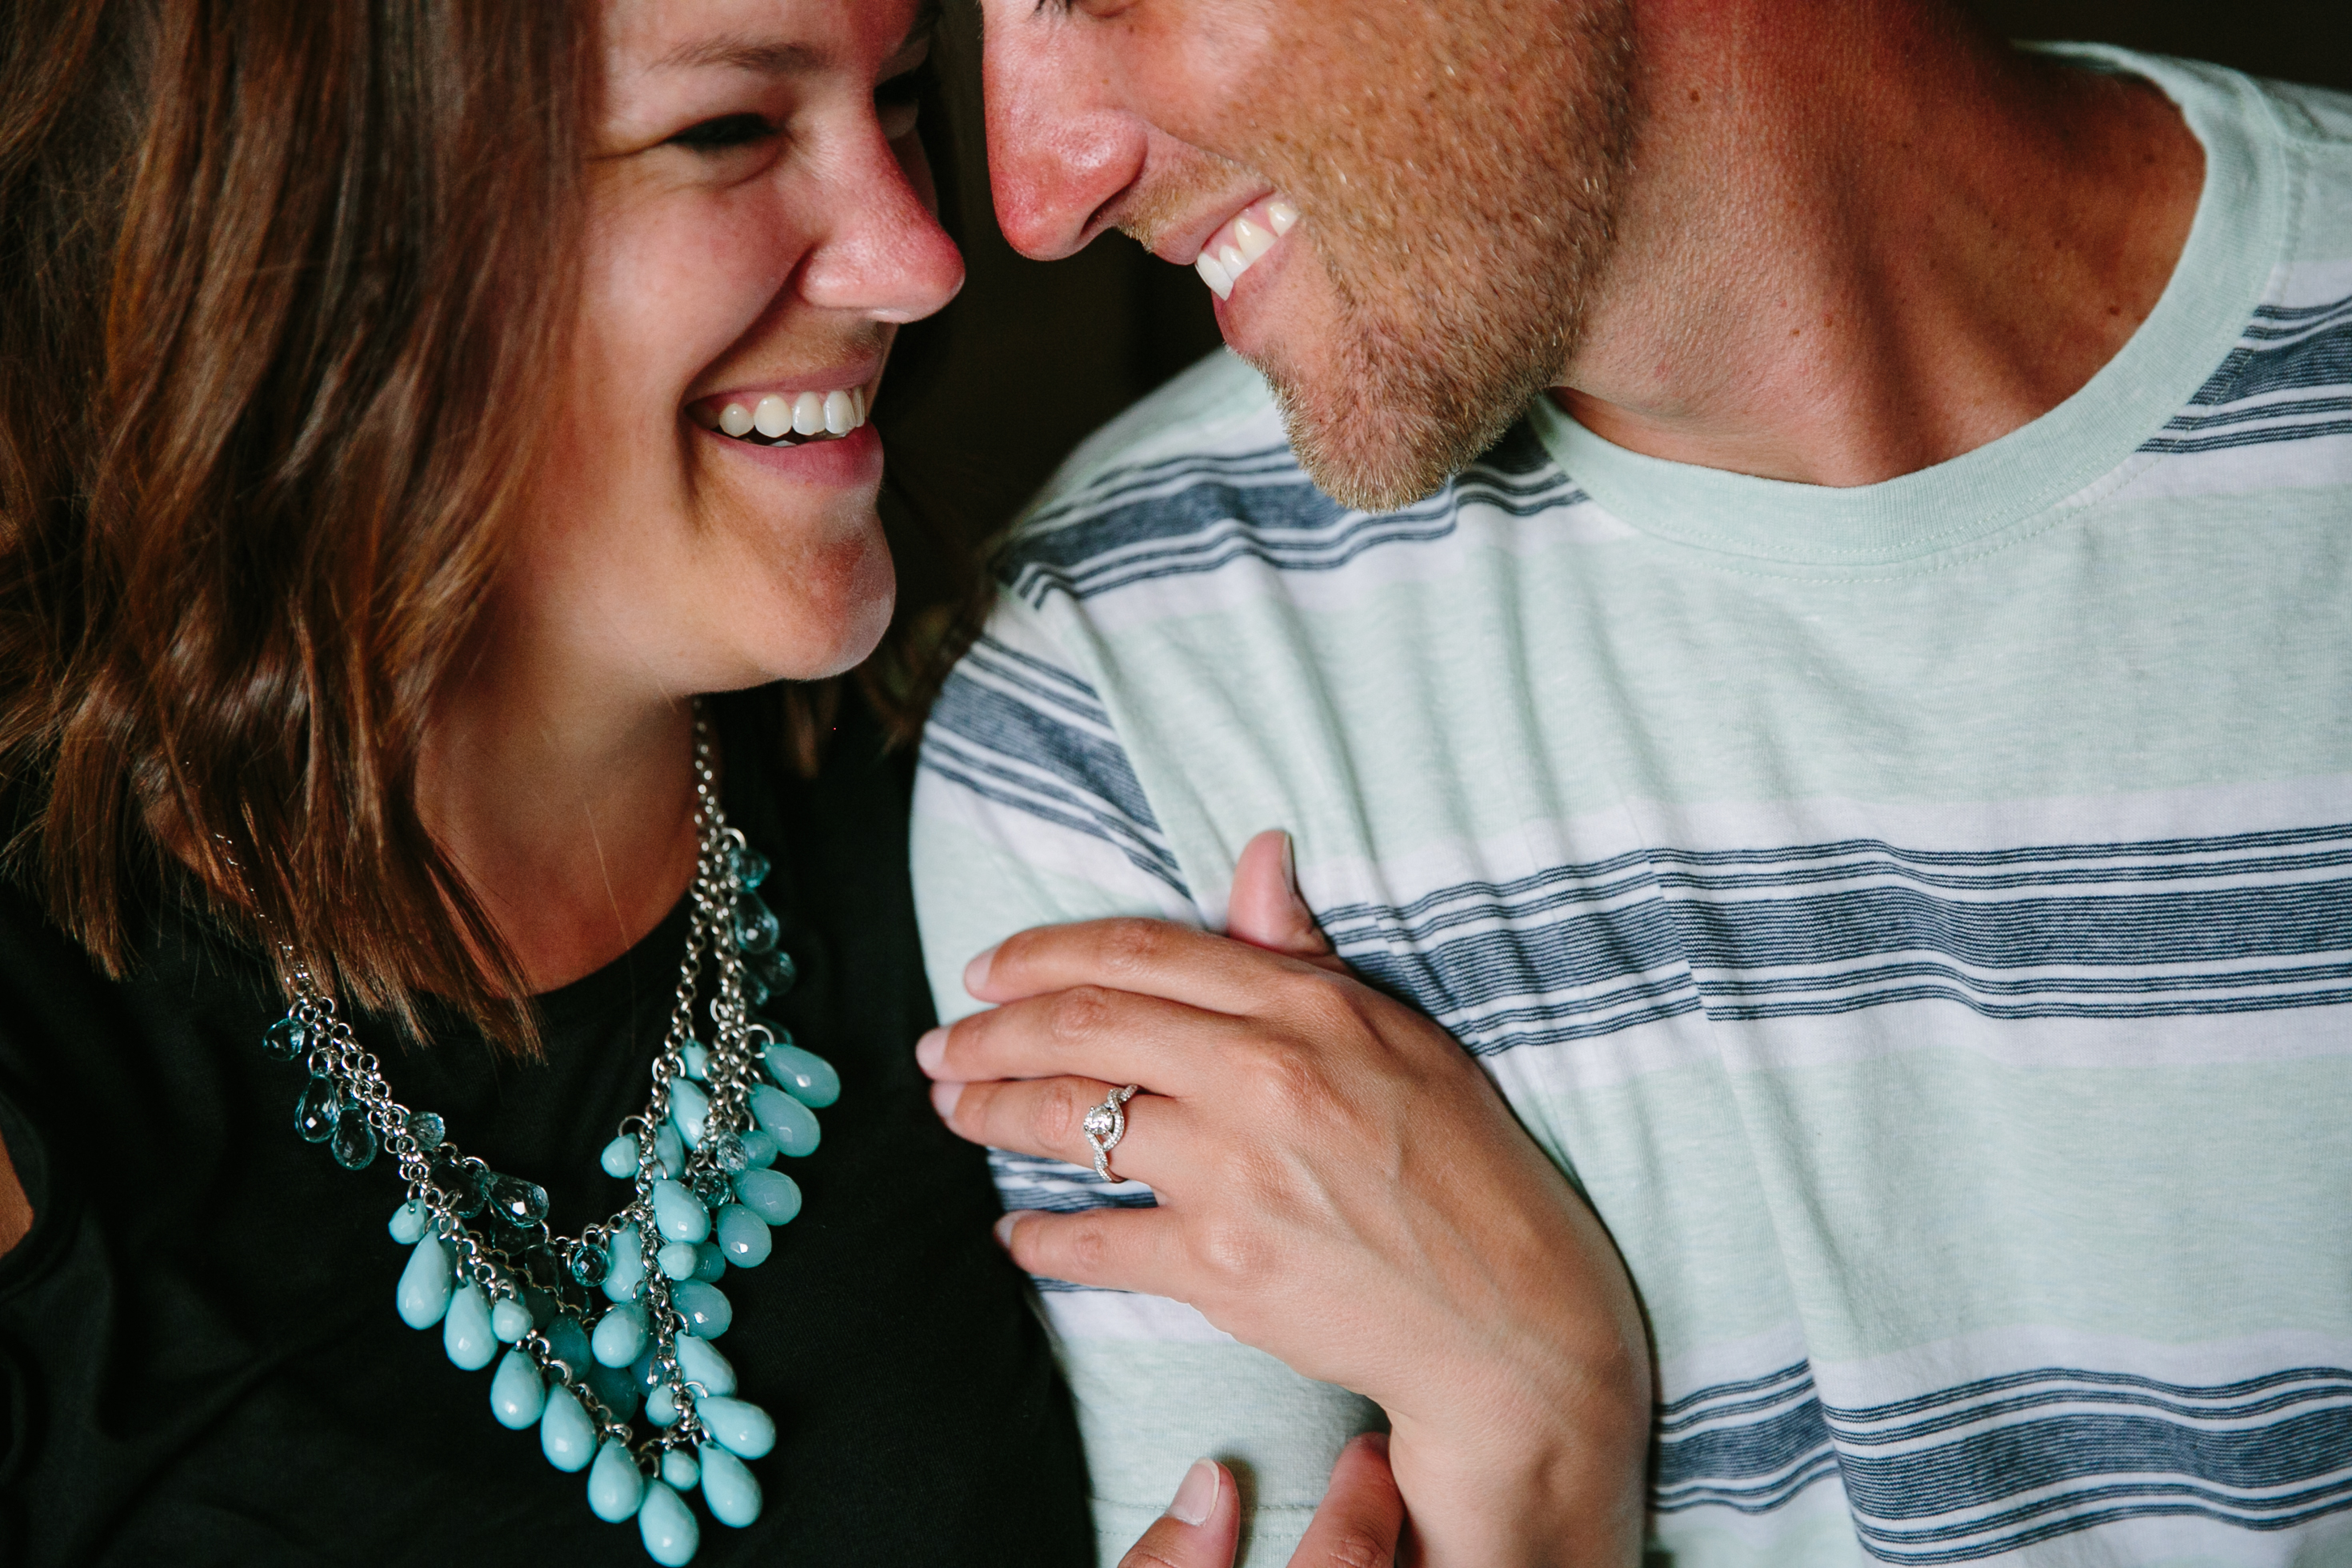 in-home dubuque engagement session by catherine furlin photography, couple snuggling on couch